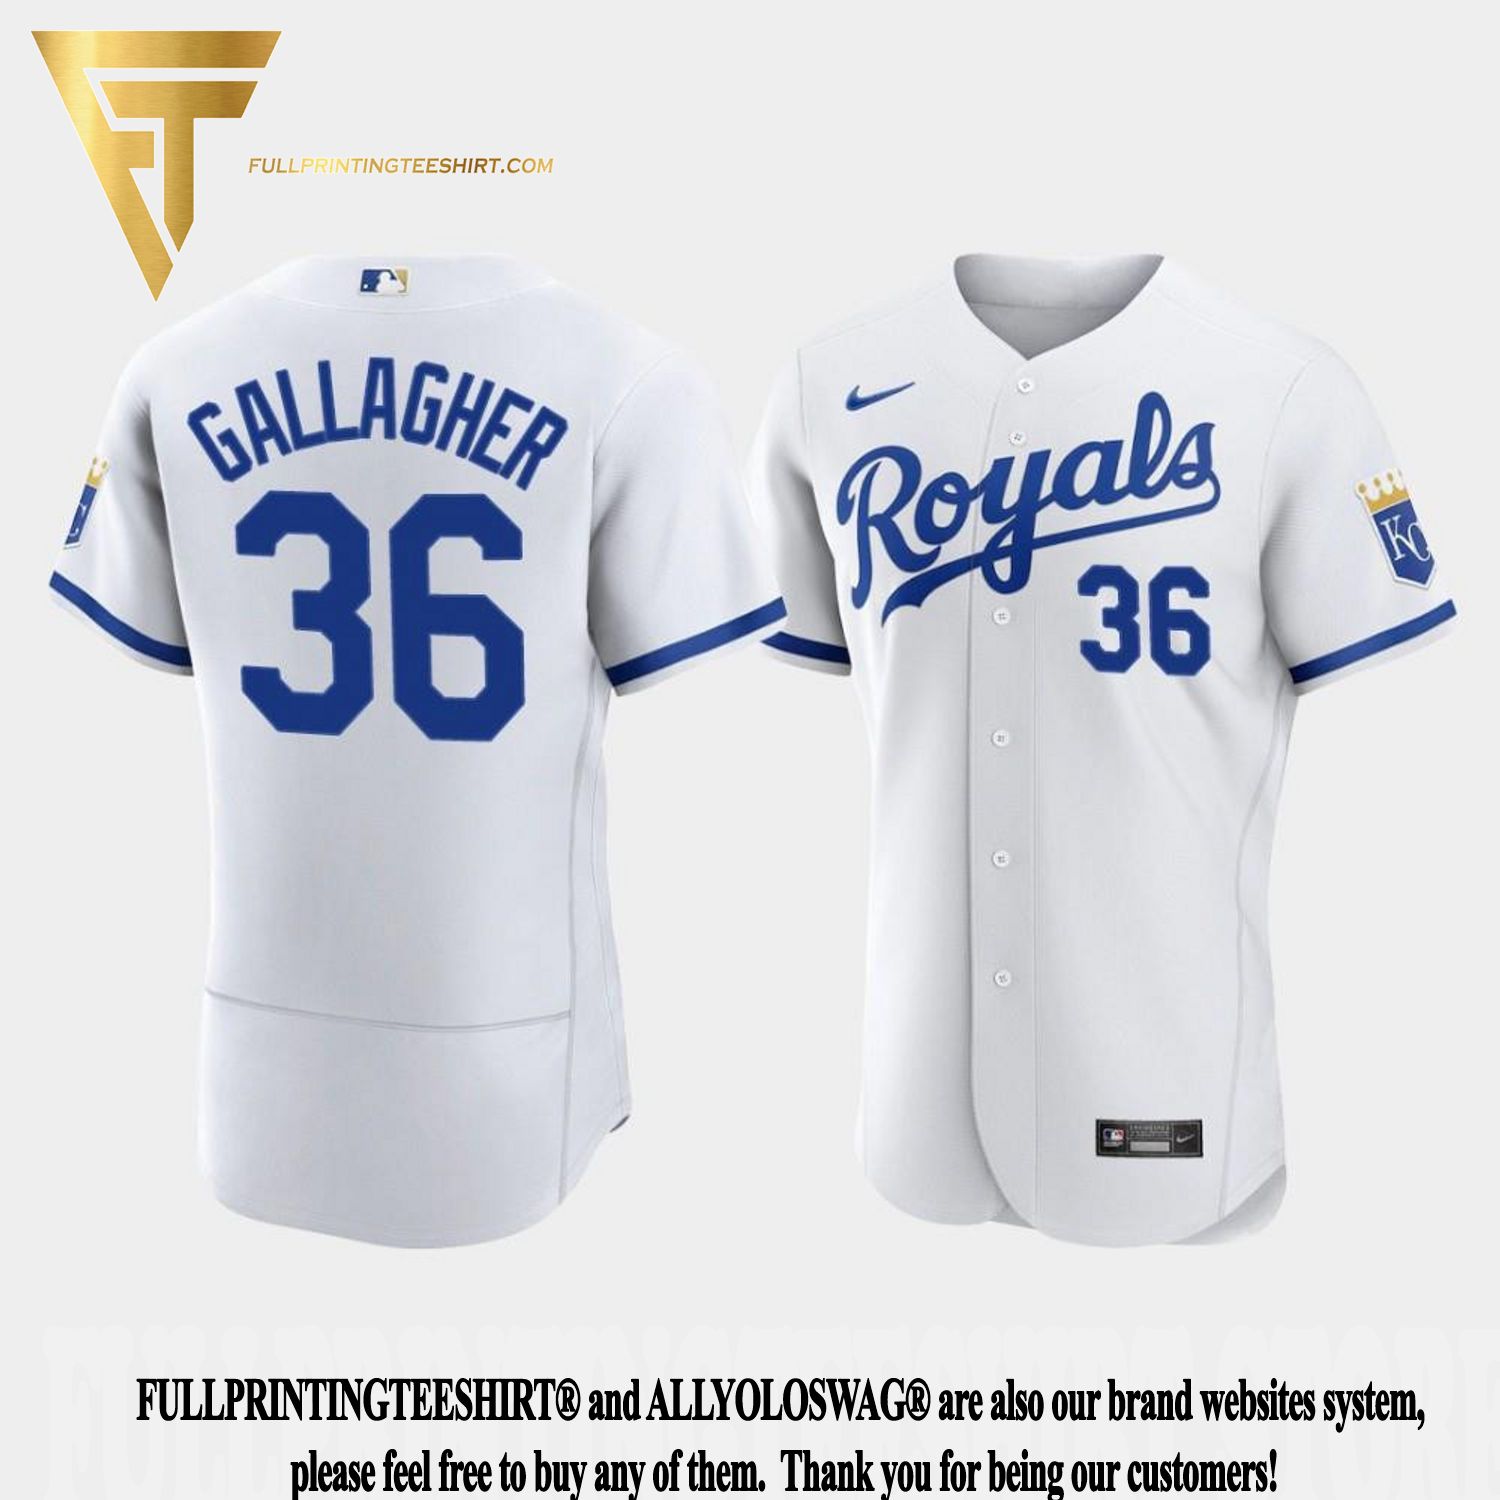 Top-selling Item] Cam Gallagher 36 Kansas City Royals Gray Road 3D